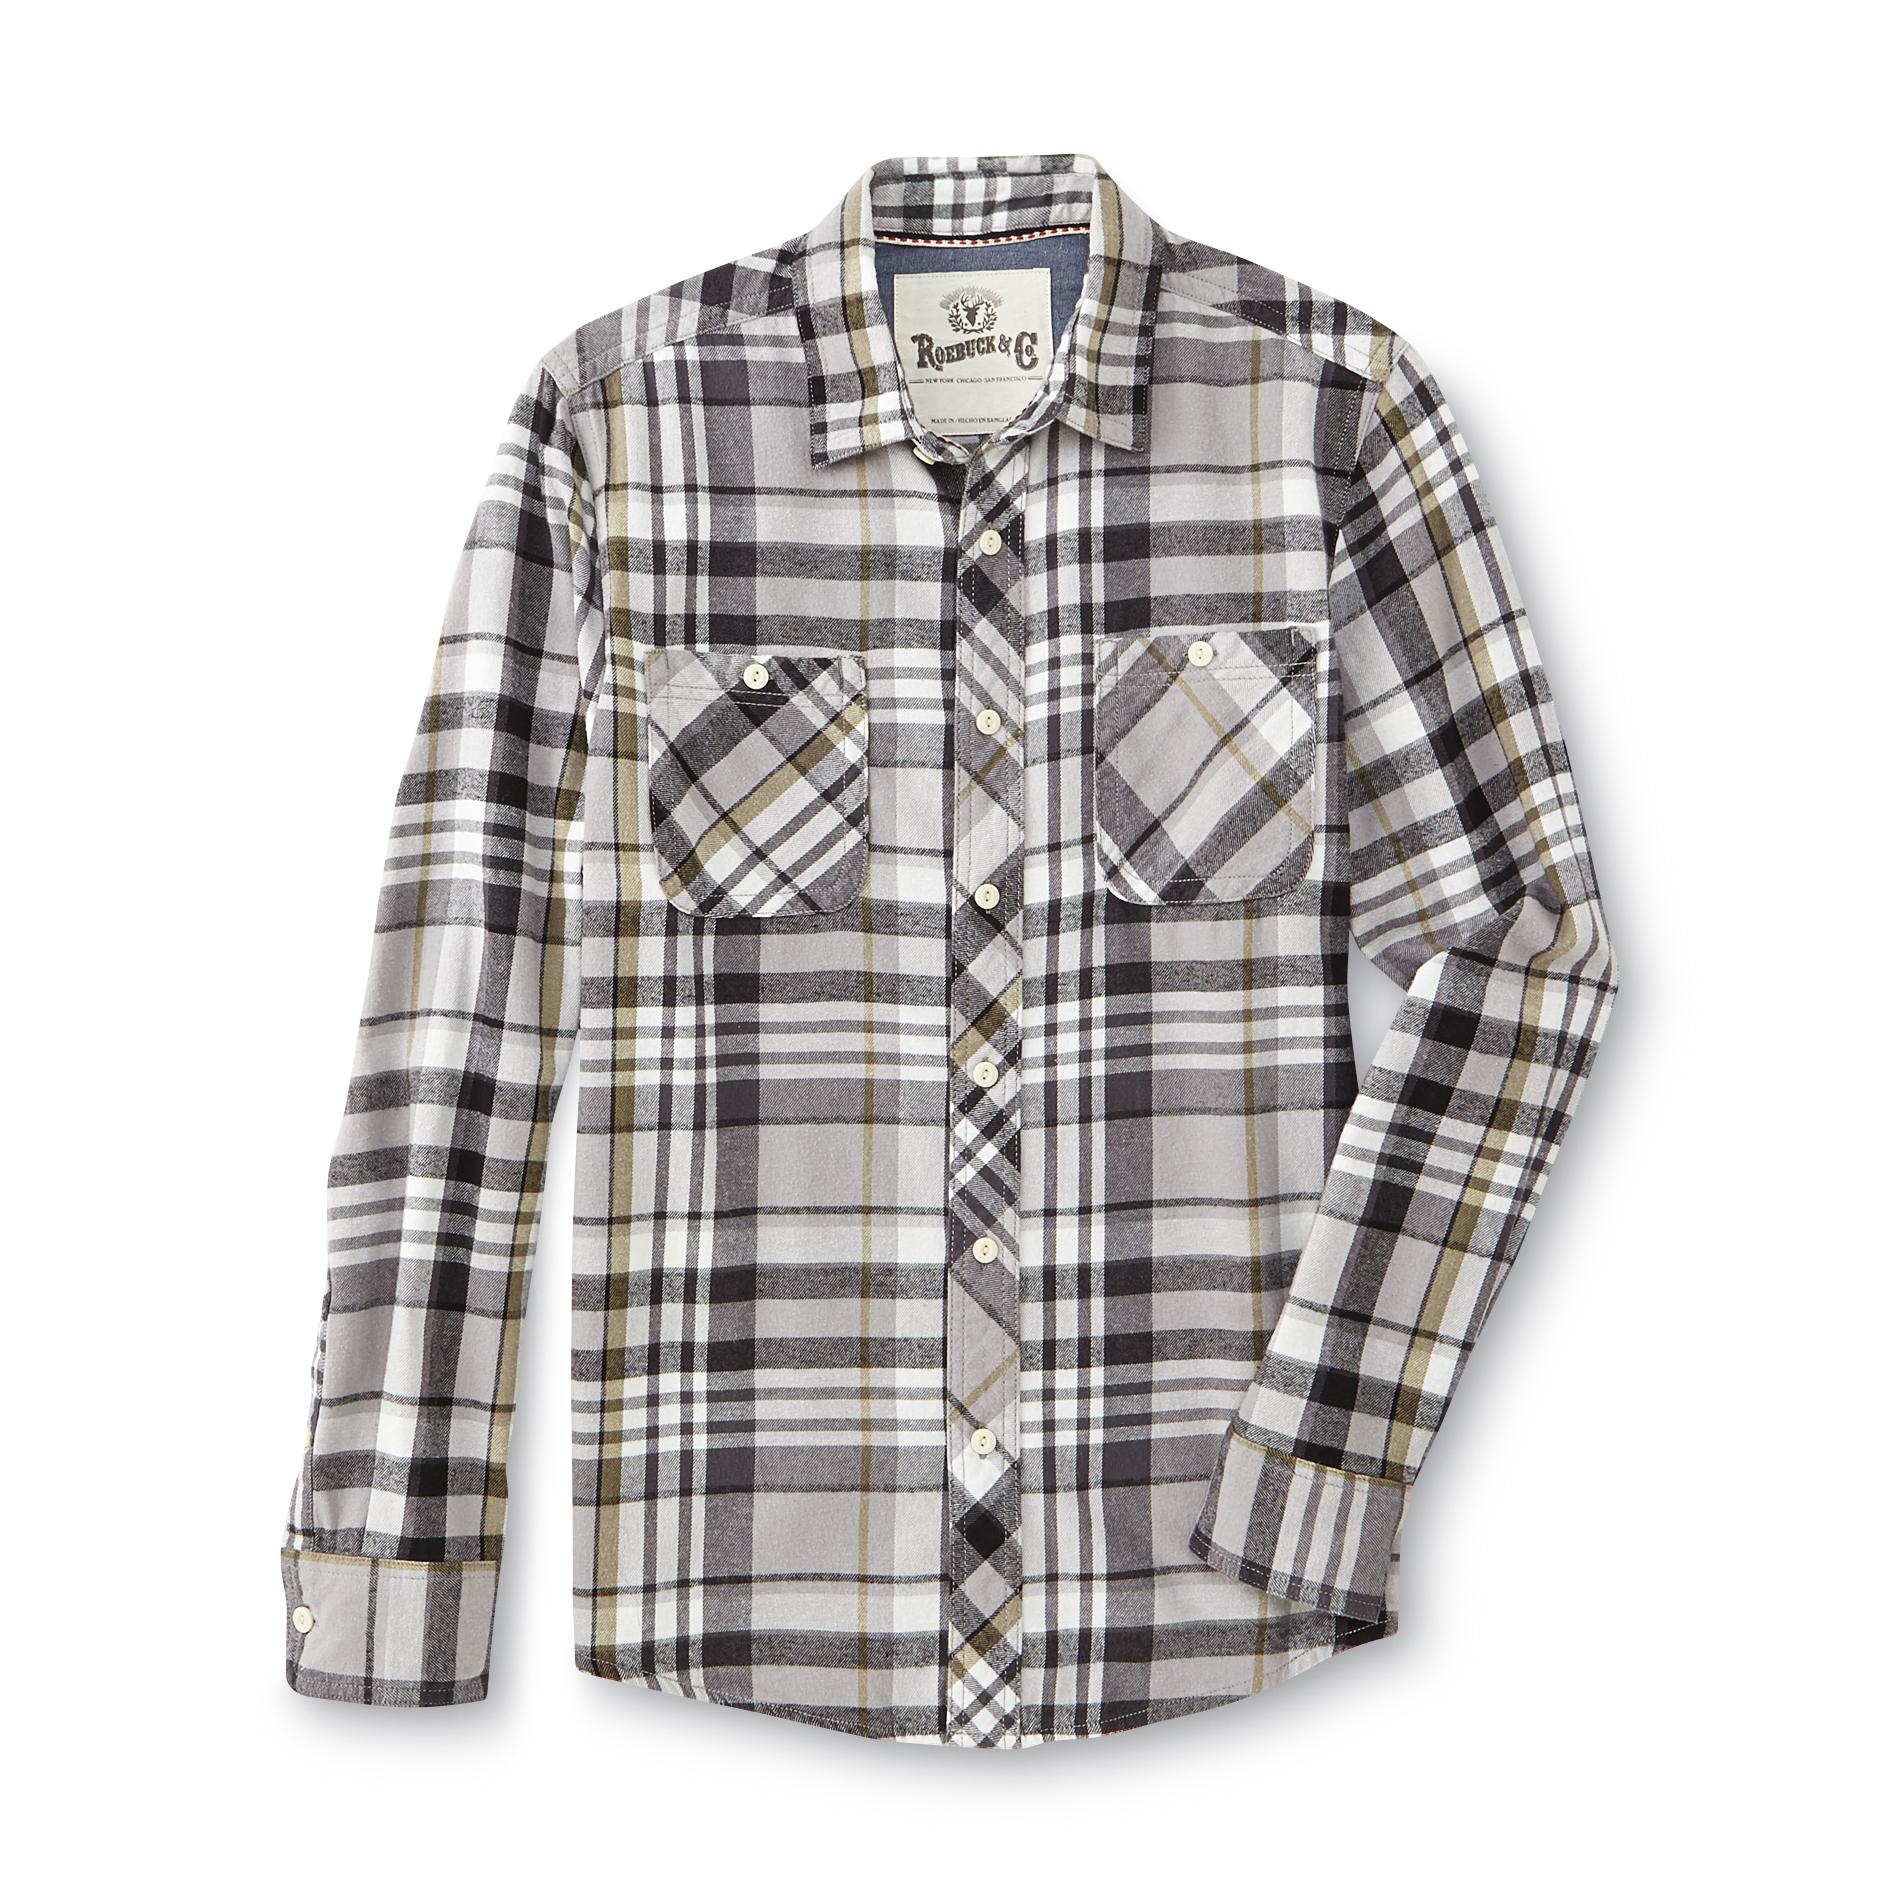 Roebuck & Co. Young Men's Flannel Shirt - Plaid